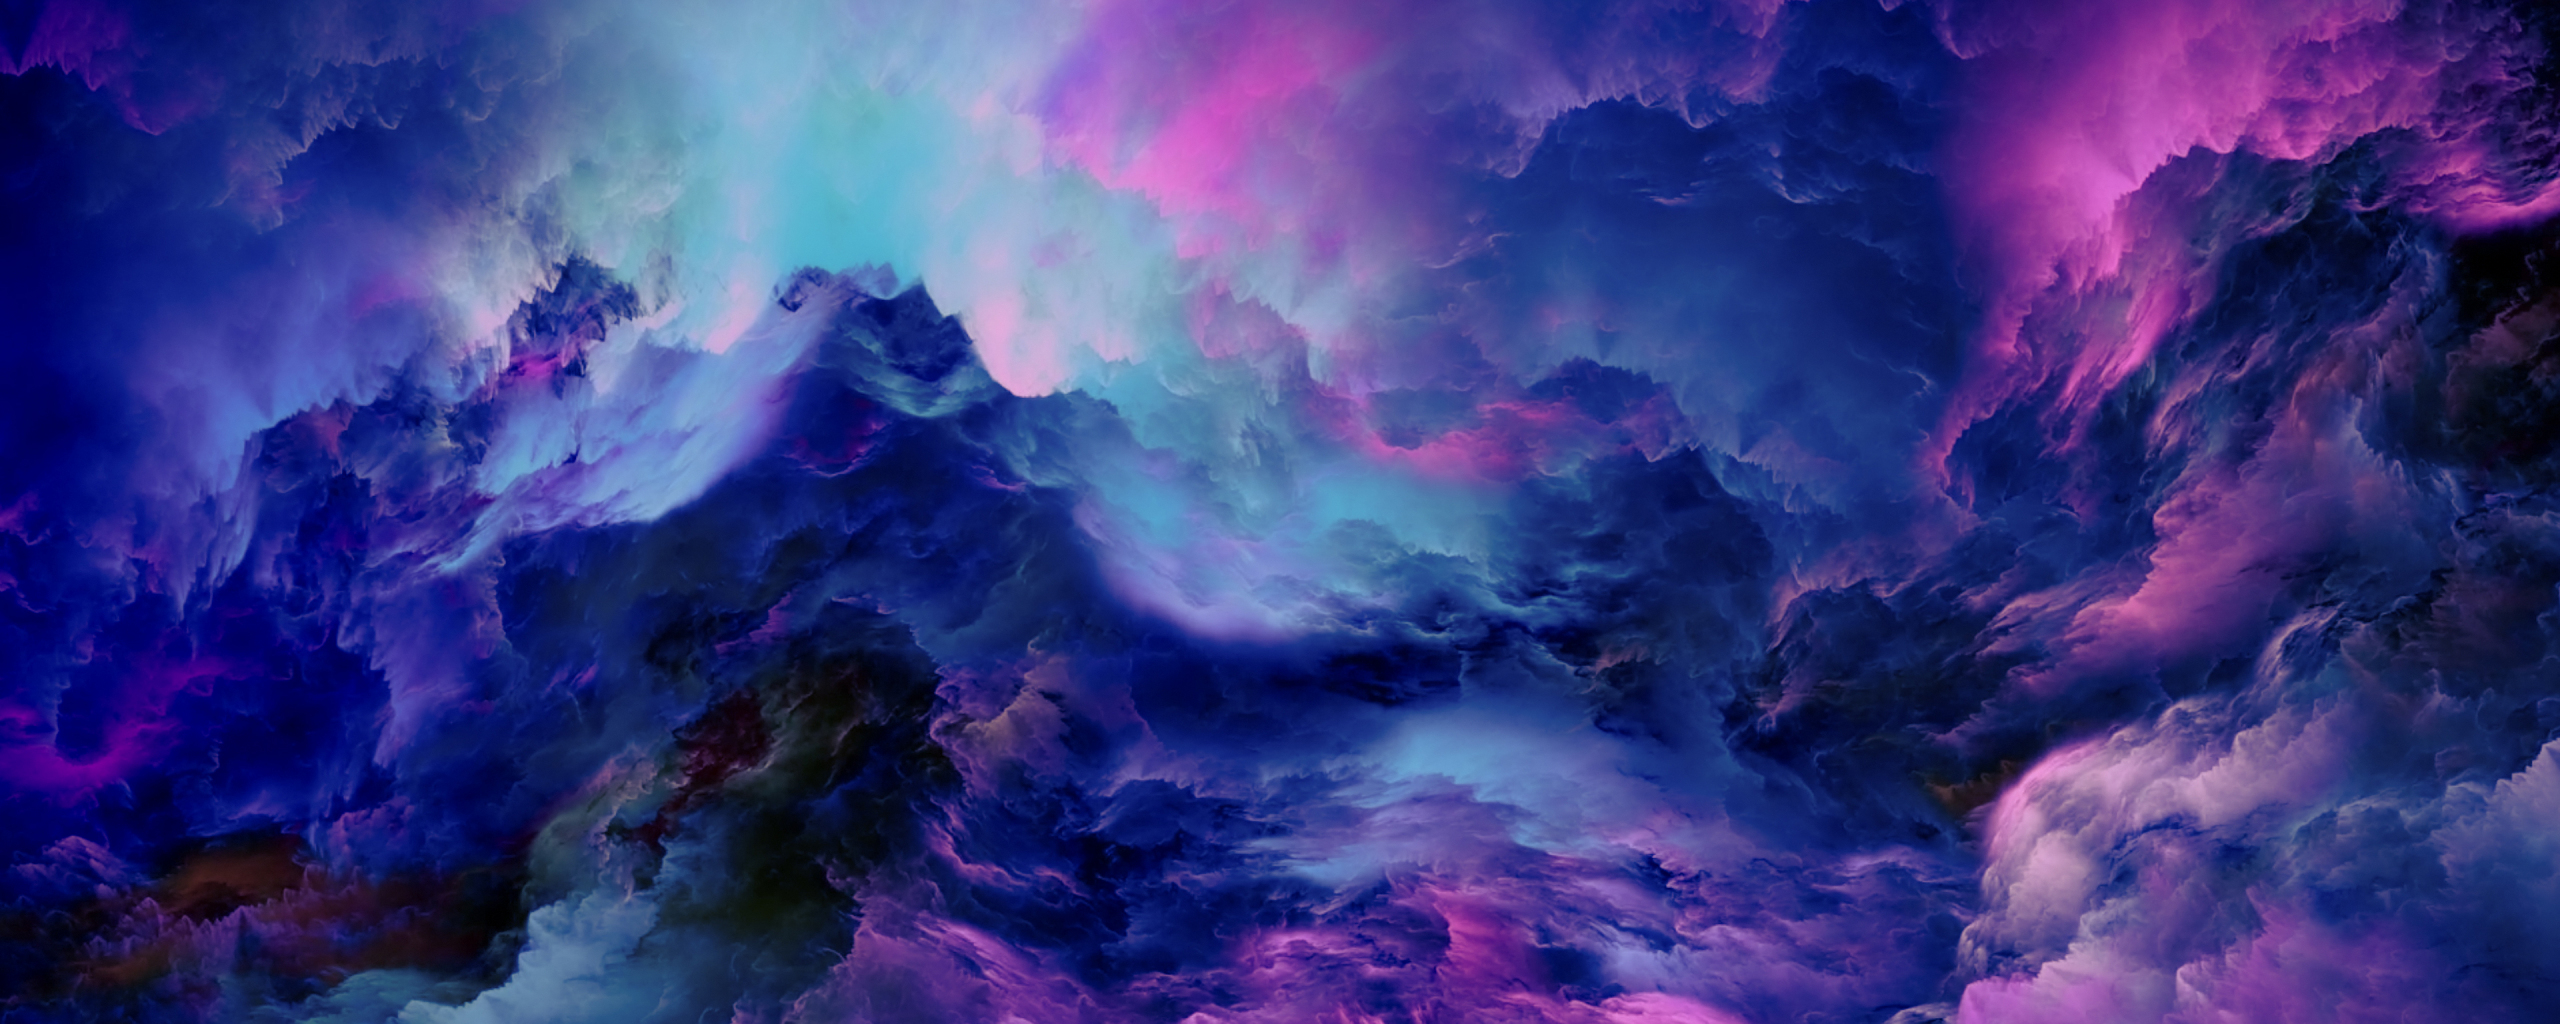 Download wallpaper 2560x1024 colorful clouds, abstract, blue-pinkish ...